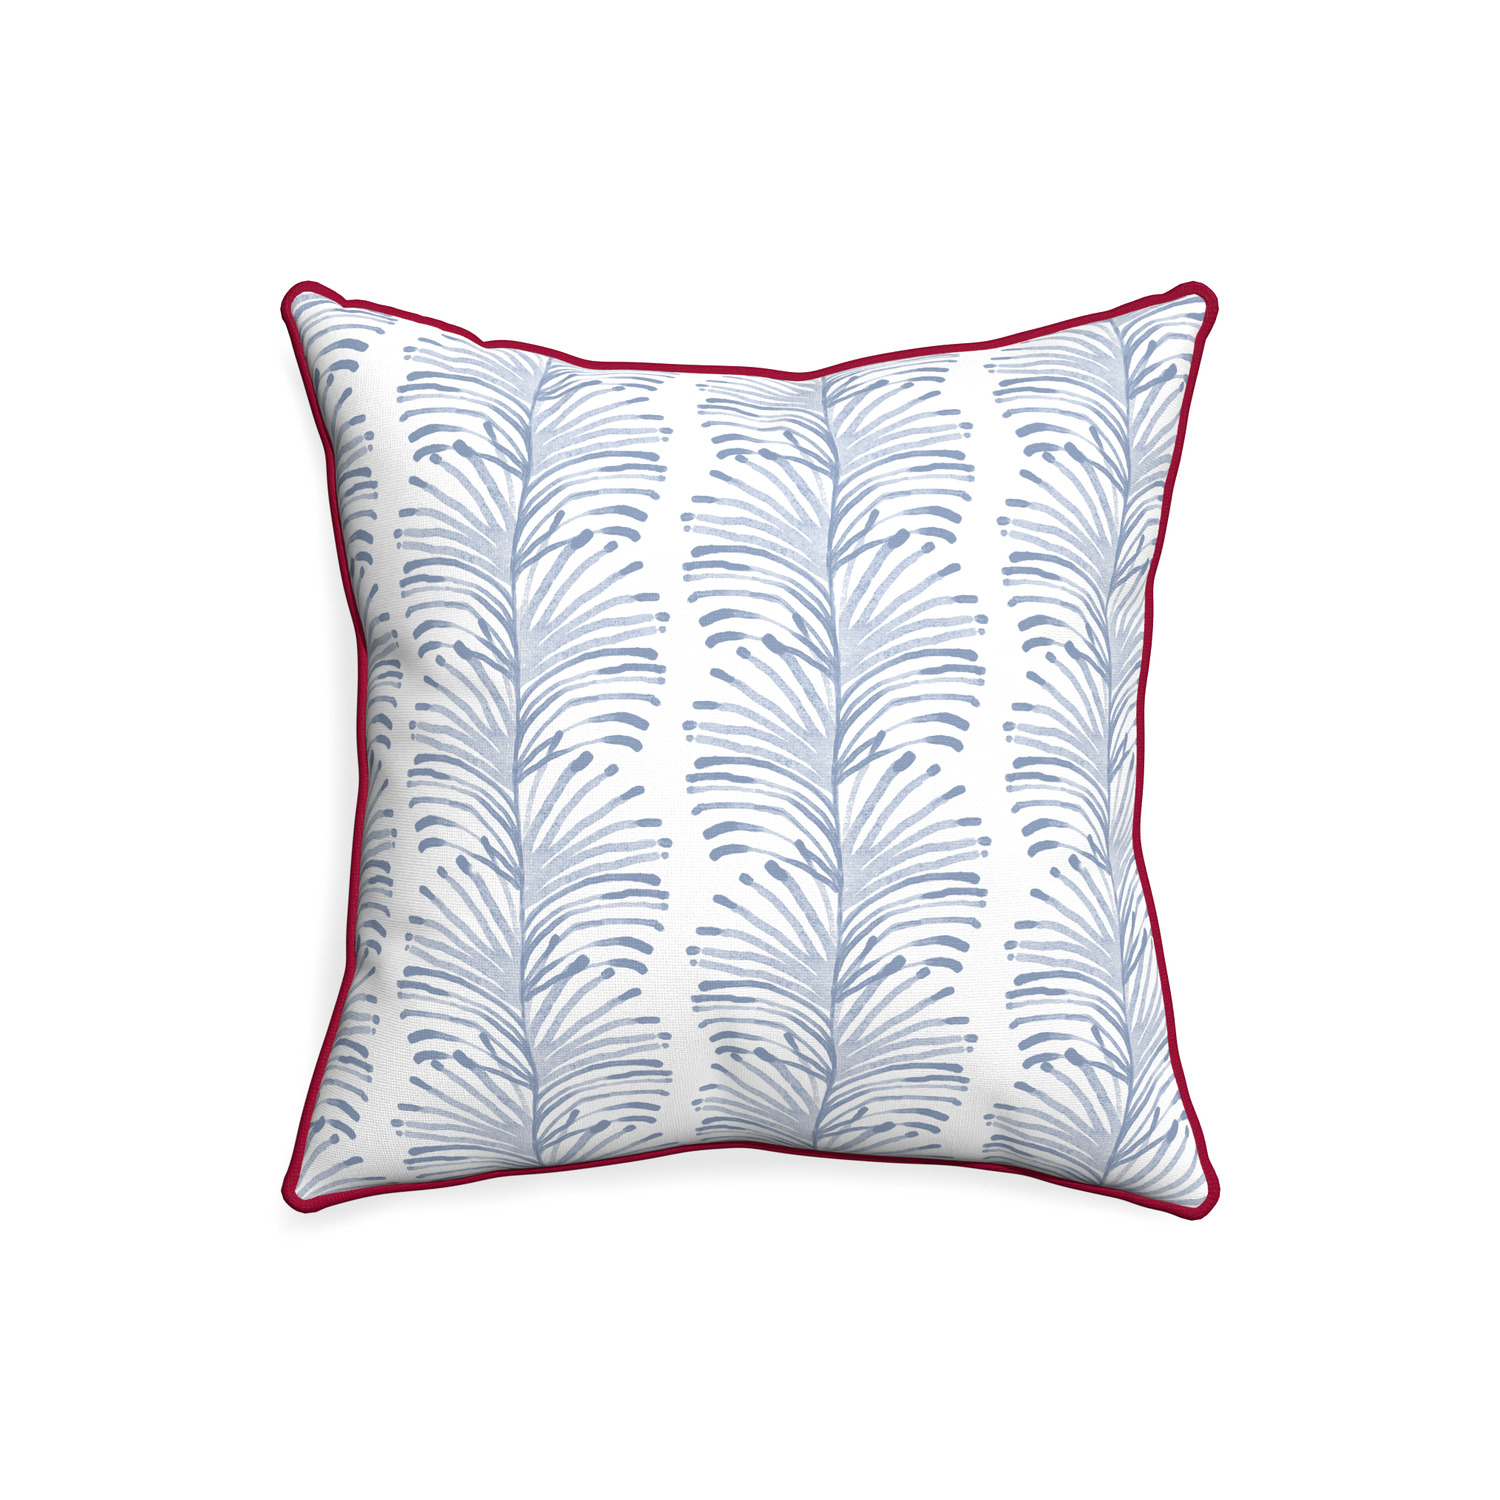 20-square emma sky custom sky blue botanical stripepillow with raspberry piping on white background